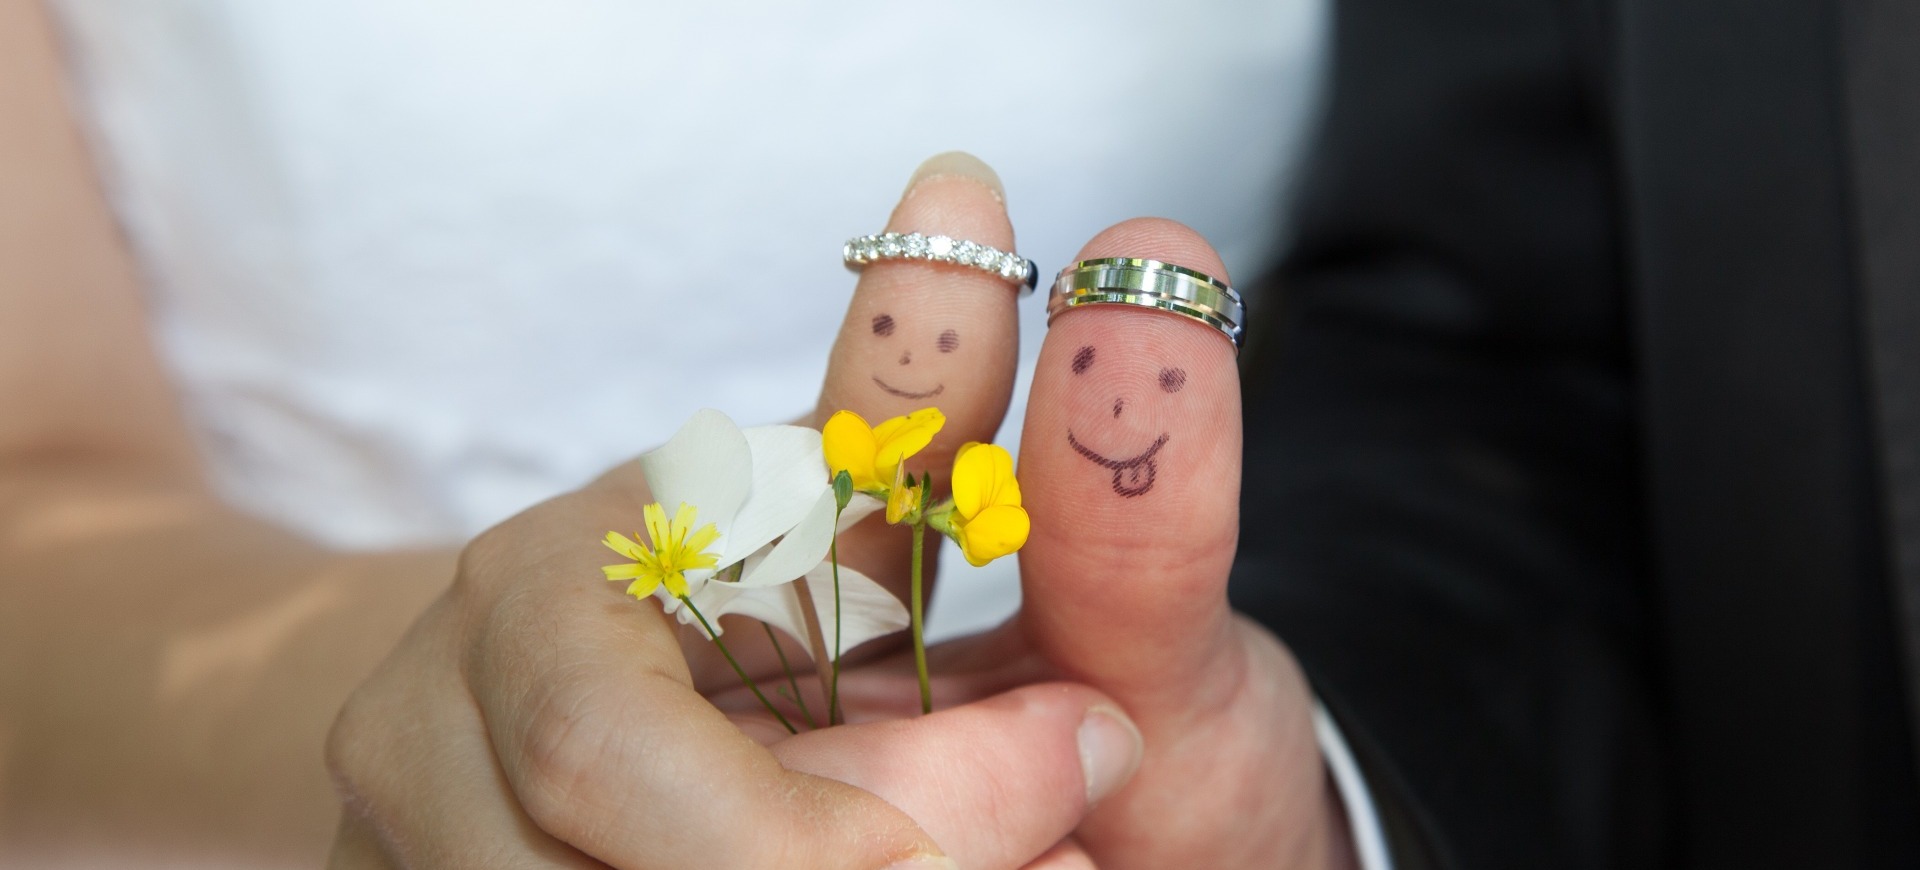 A Bride & Groom's thumbs with drawn smiley faces, holding four small flowers, wearing their wedding rings as crowns.